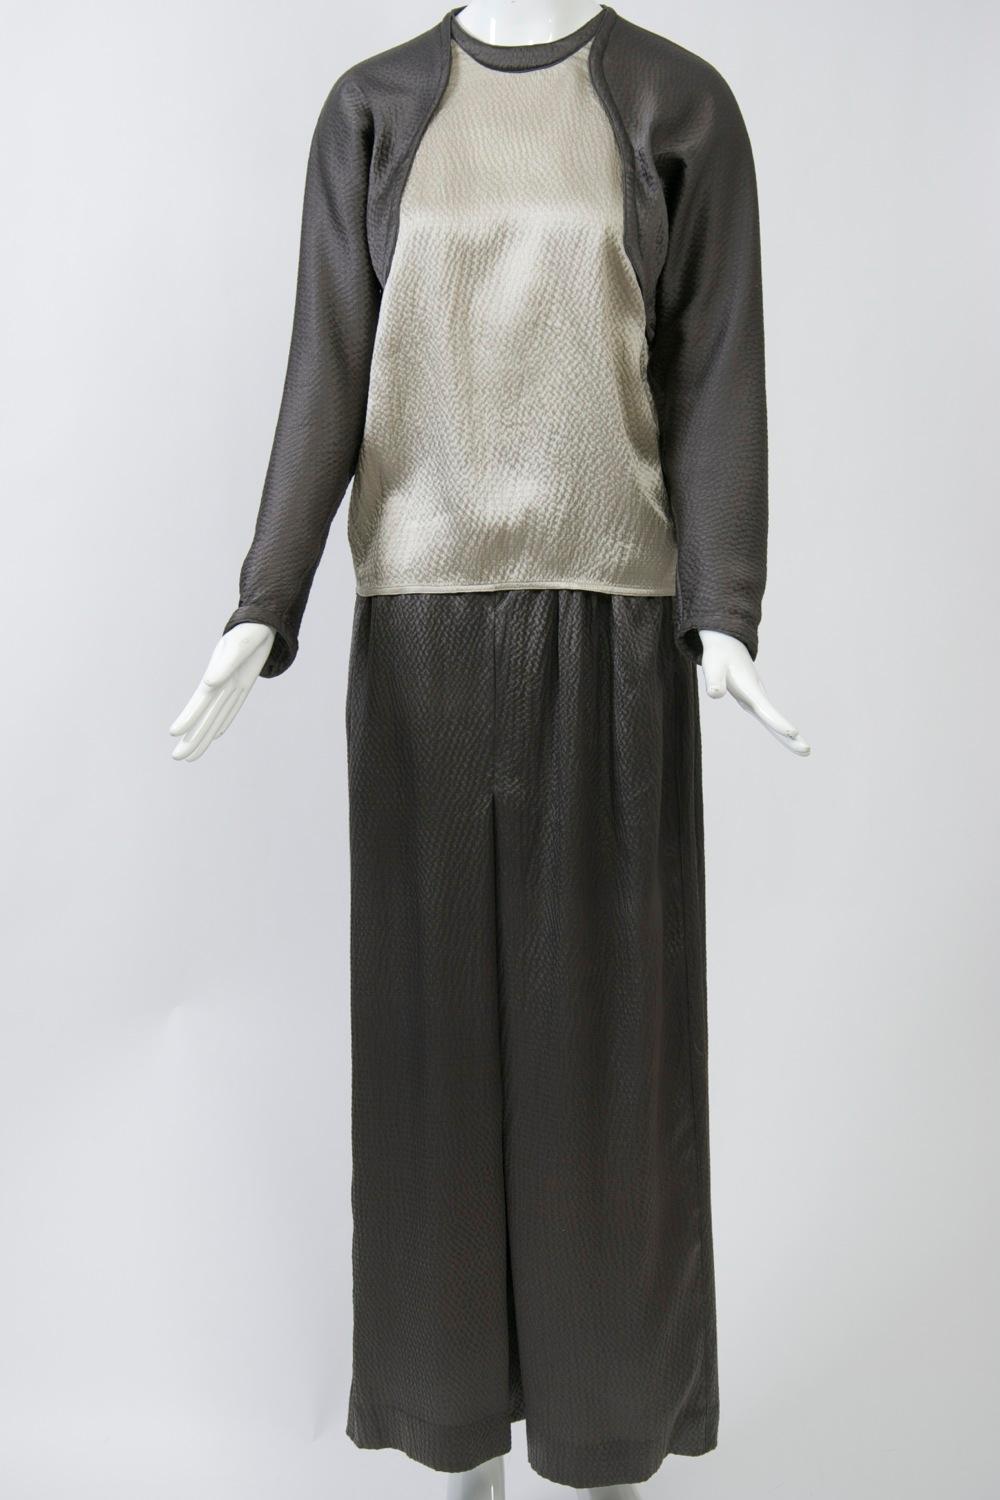 Geoffrey Beene outfit of pants, blouse and scarf crafted of a silky, puckered fabric in a sophisticated palette of taupe and beige. The outfit bears Beene's signature details of welted, curved seams in the blouse and topstitching on the curved